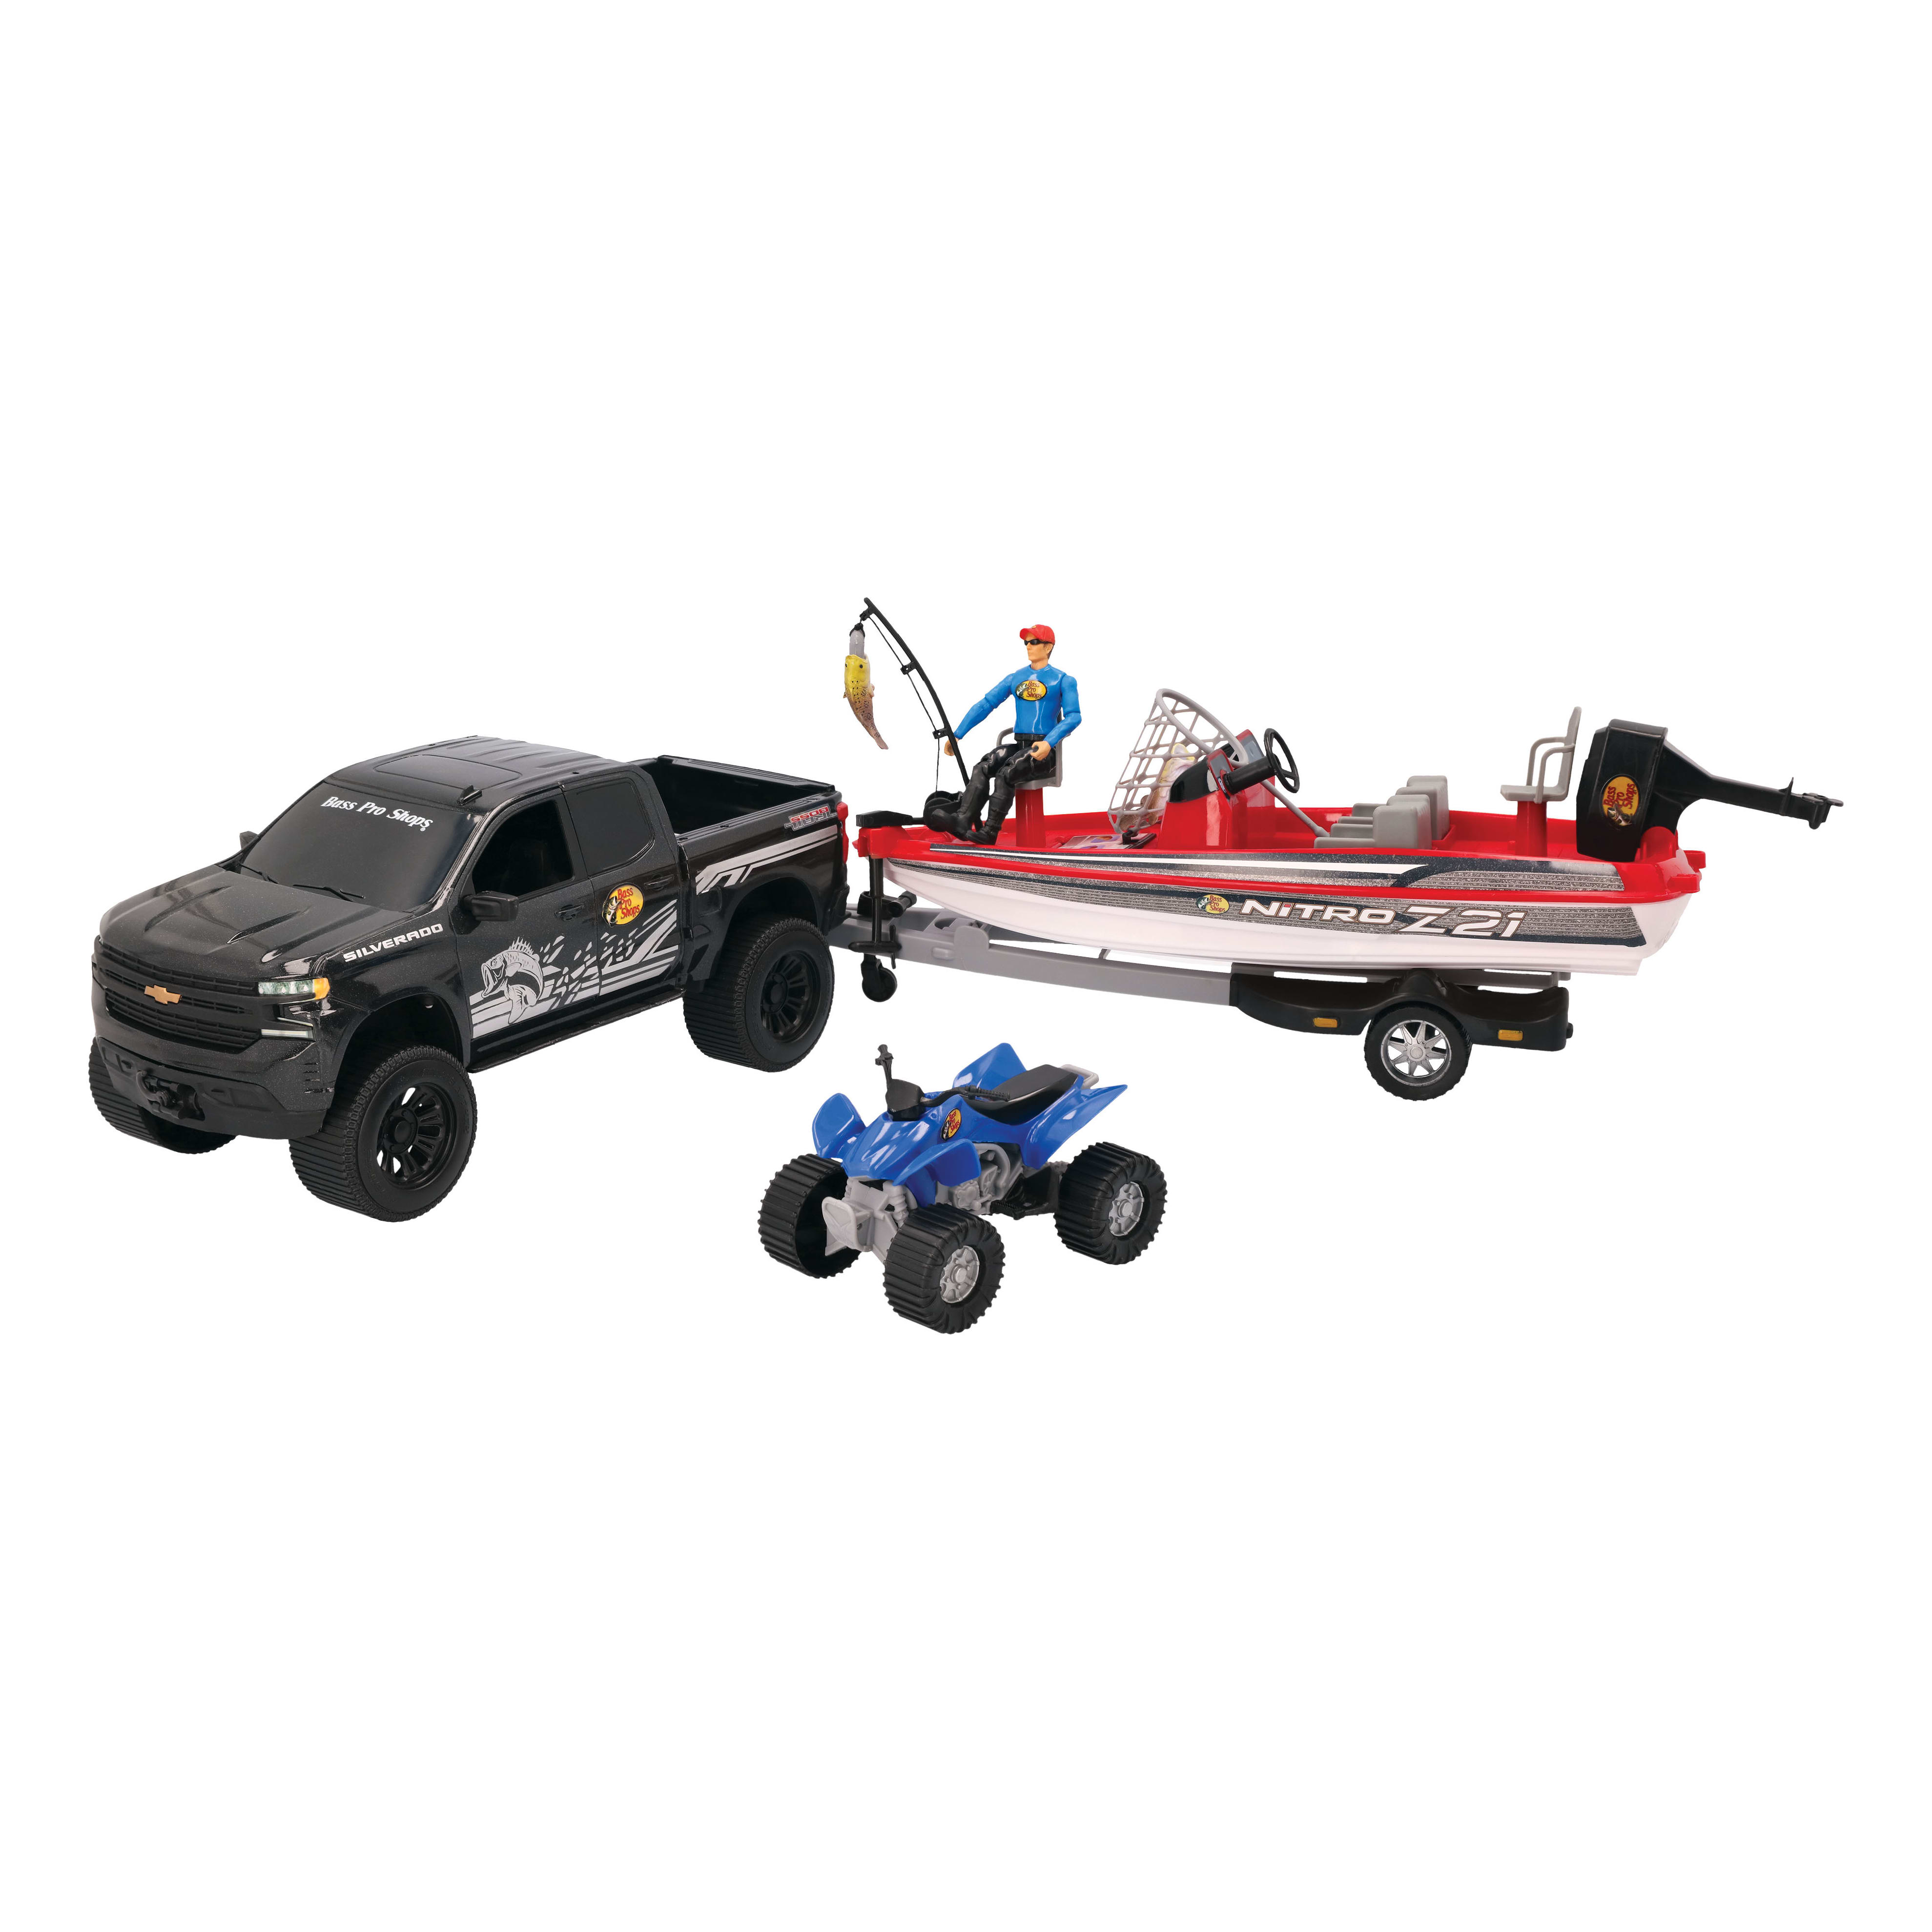 Bass Pro Shops® Imagination Adventure Ford Raptor with Bass Boat Play Set for Kids